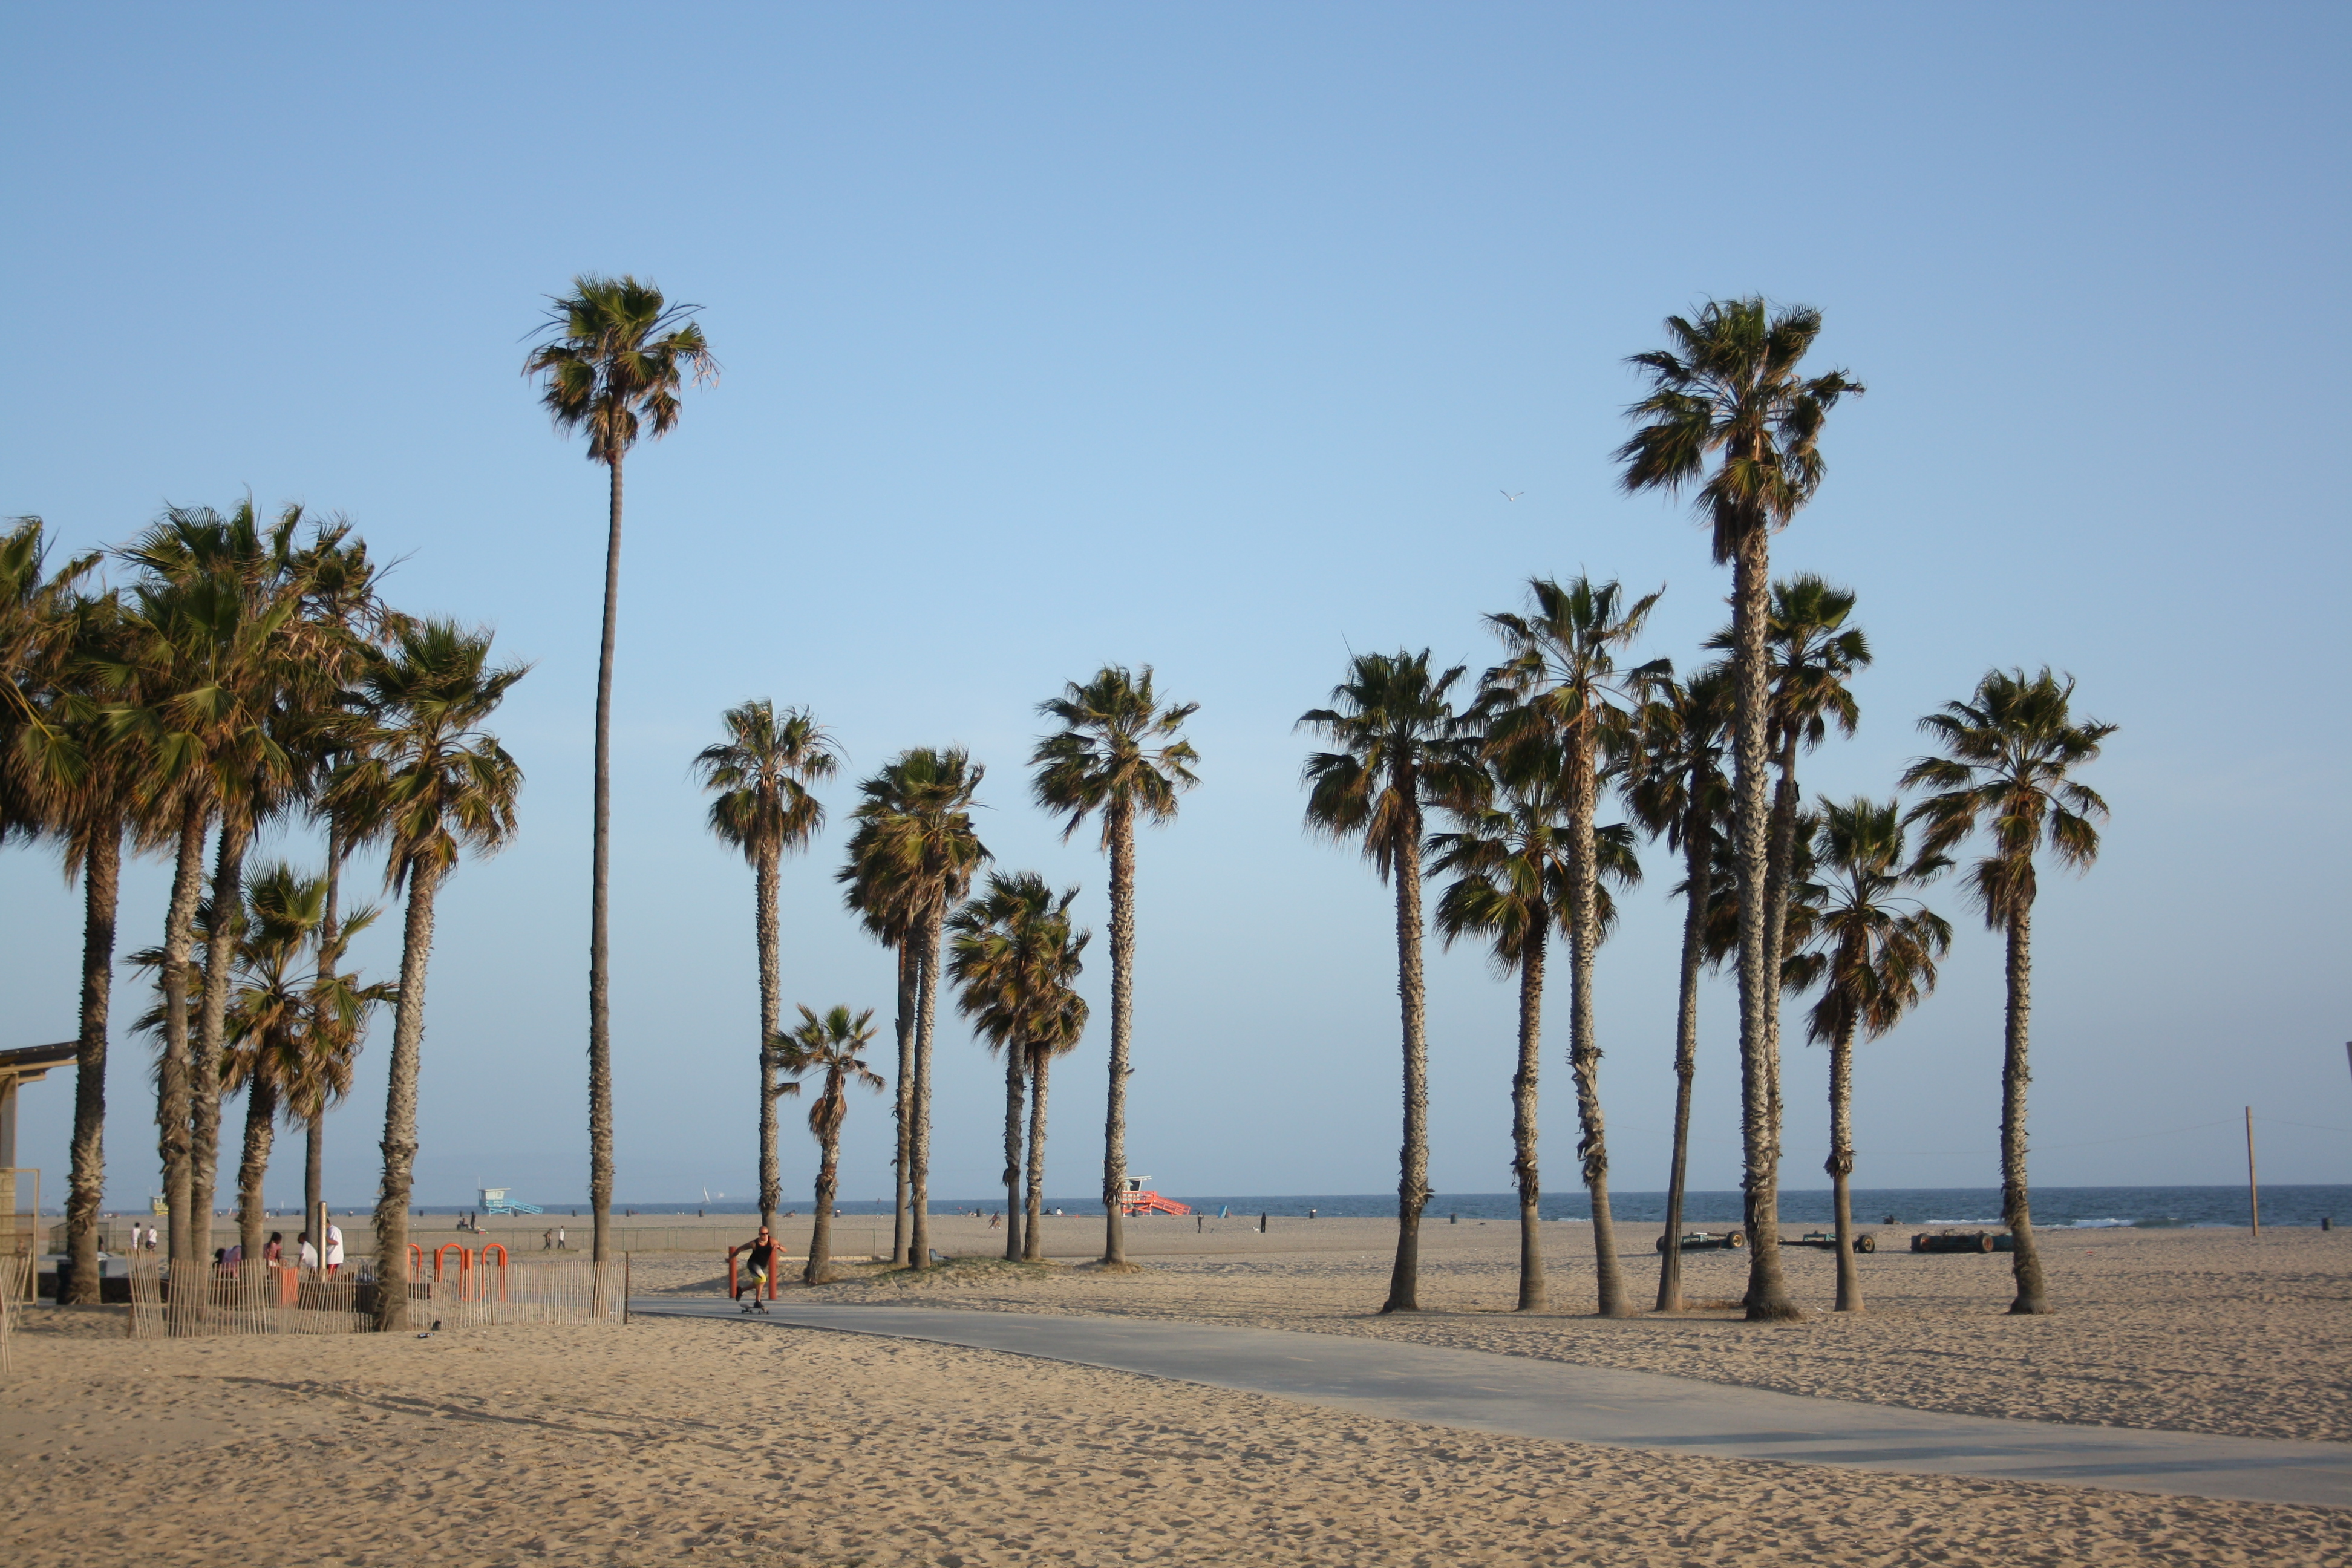 Top 5 stops along the Pacific Coast Highway – L.A. to Laguna Beach